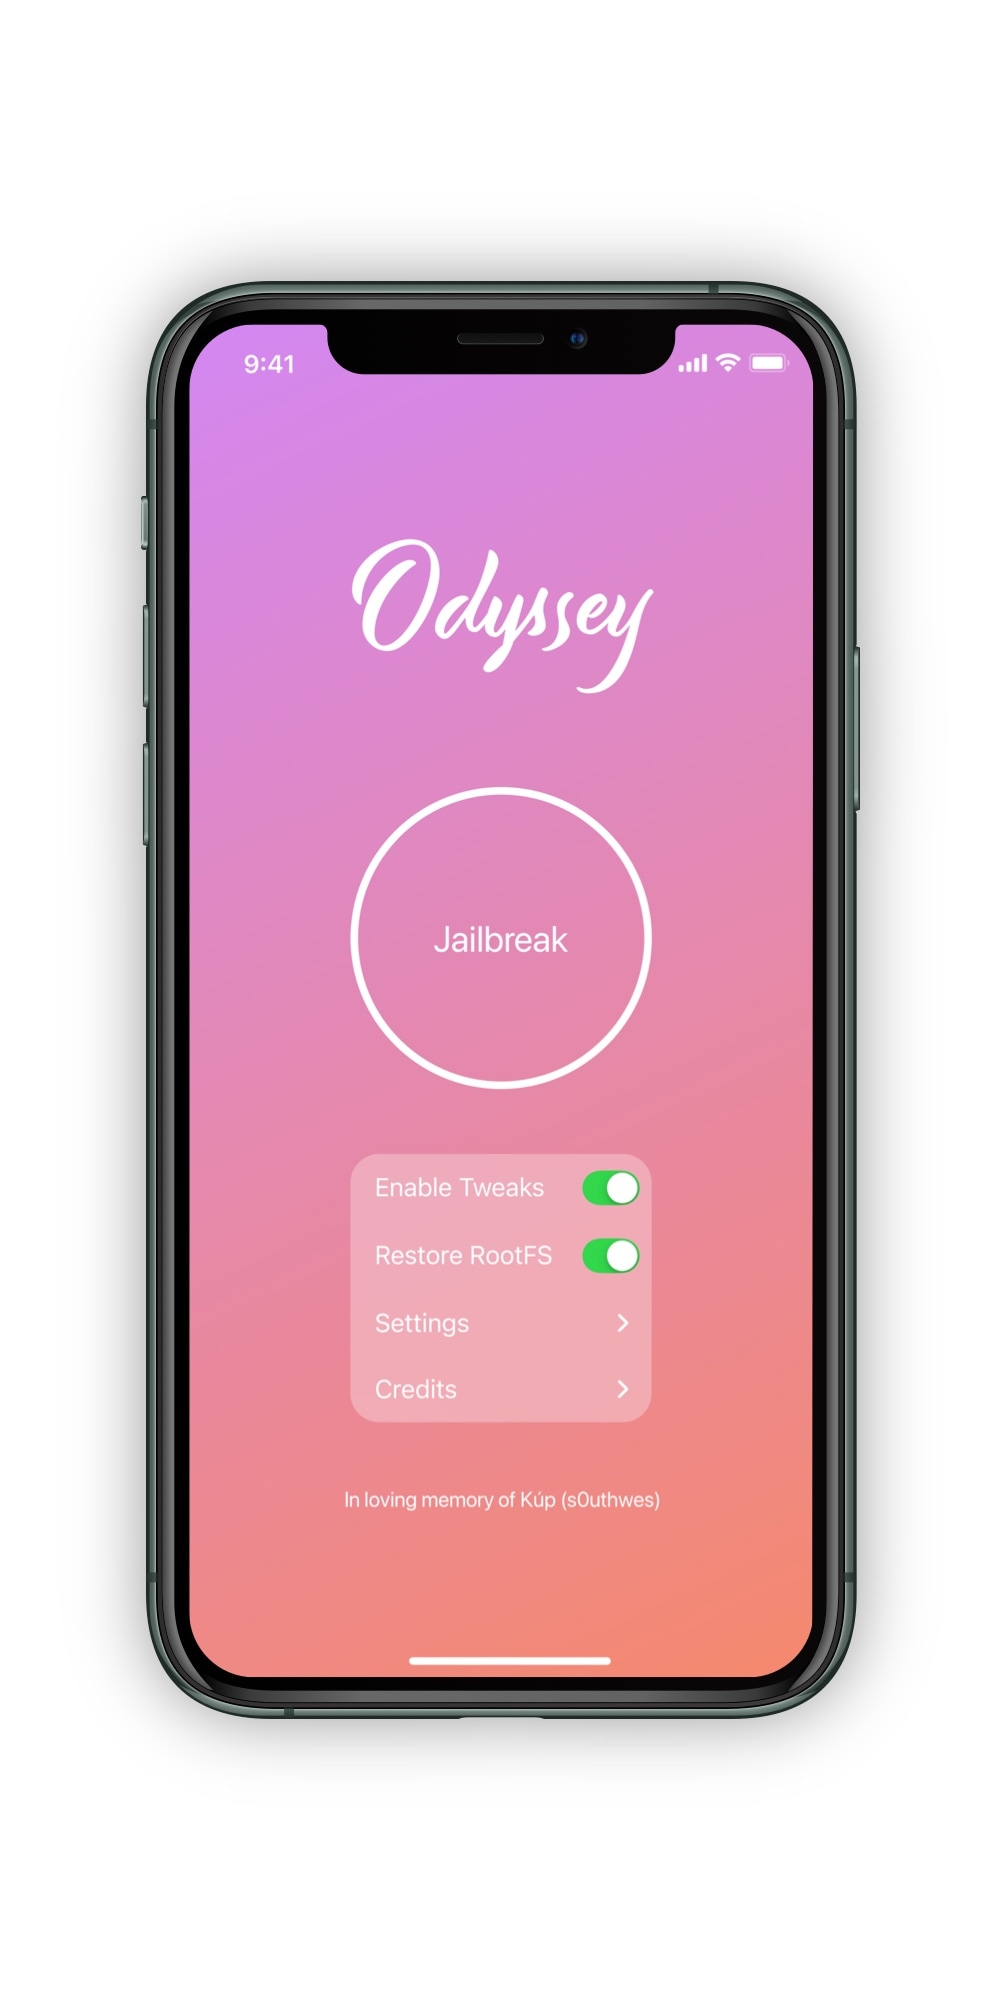 CoolStar says Odyssey jailbreak for iOS 13.0-13.5 on A9-A13 could